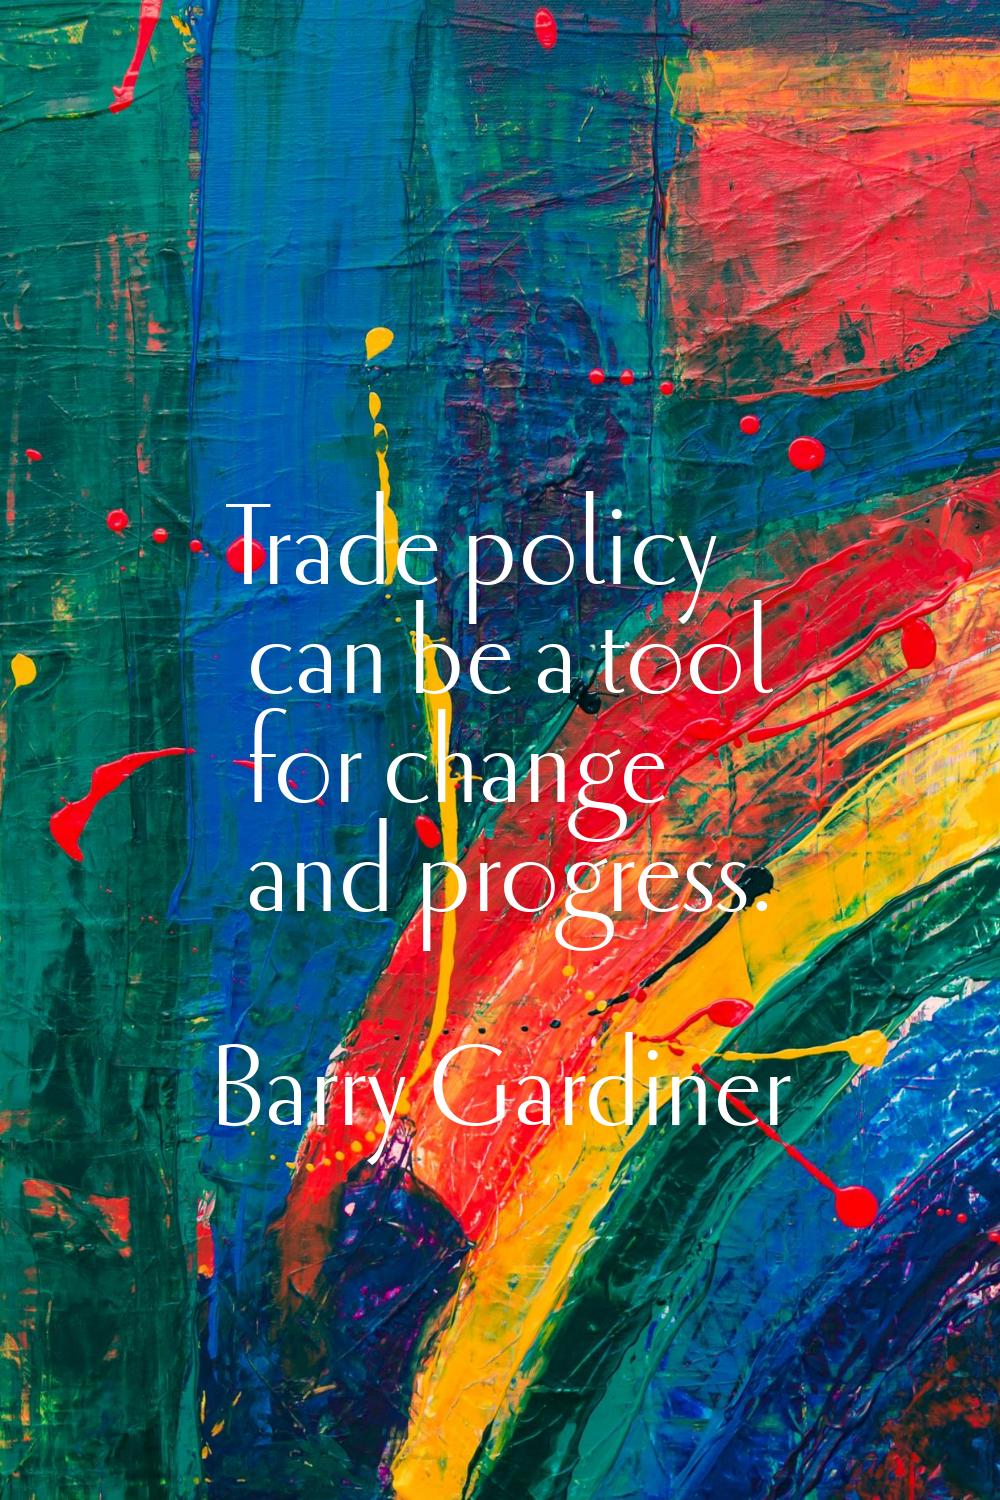 Trade policy can be a tool for change and progress.